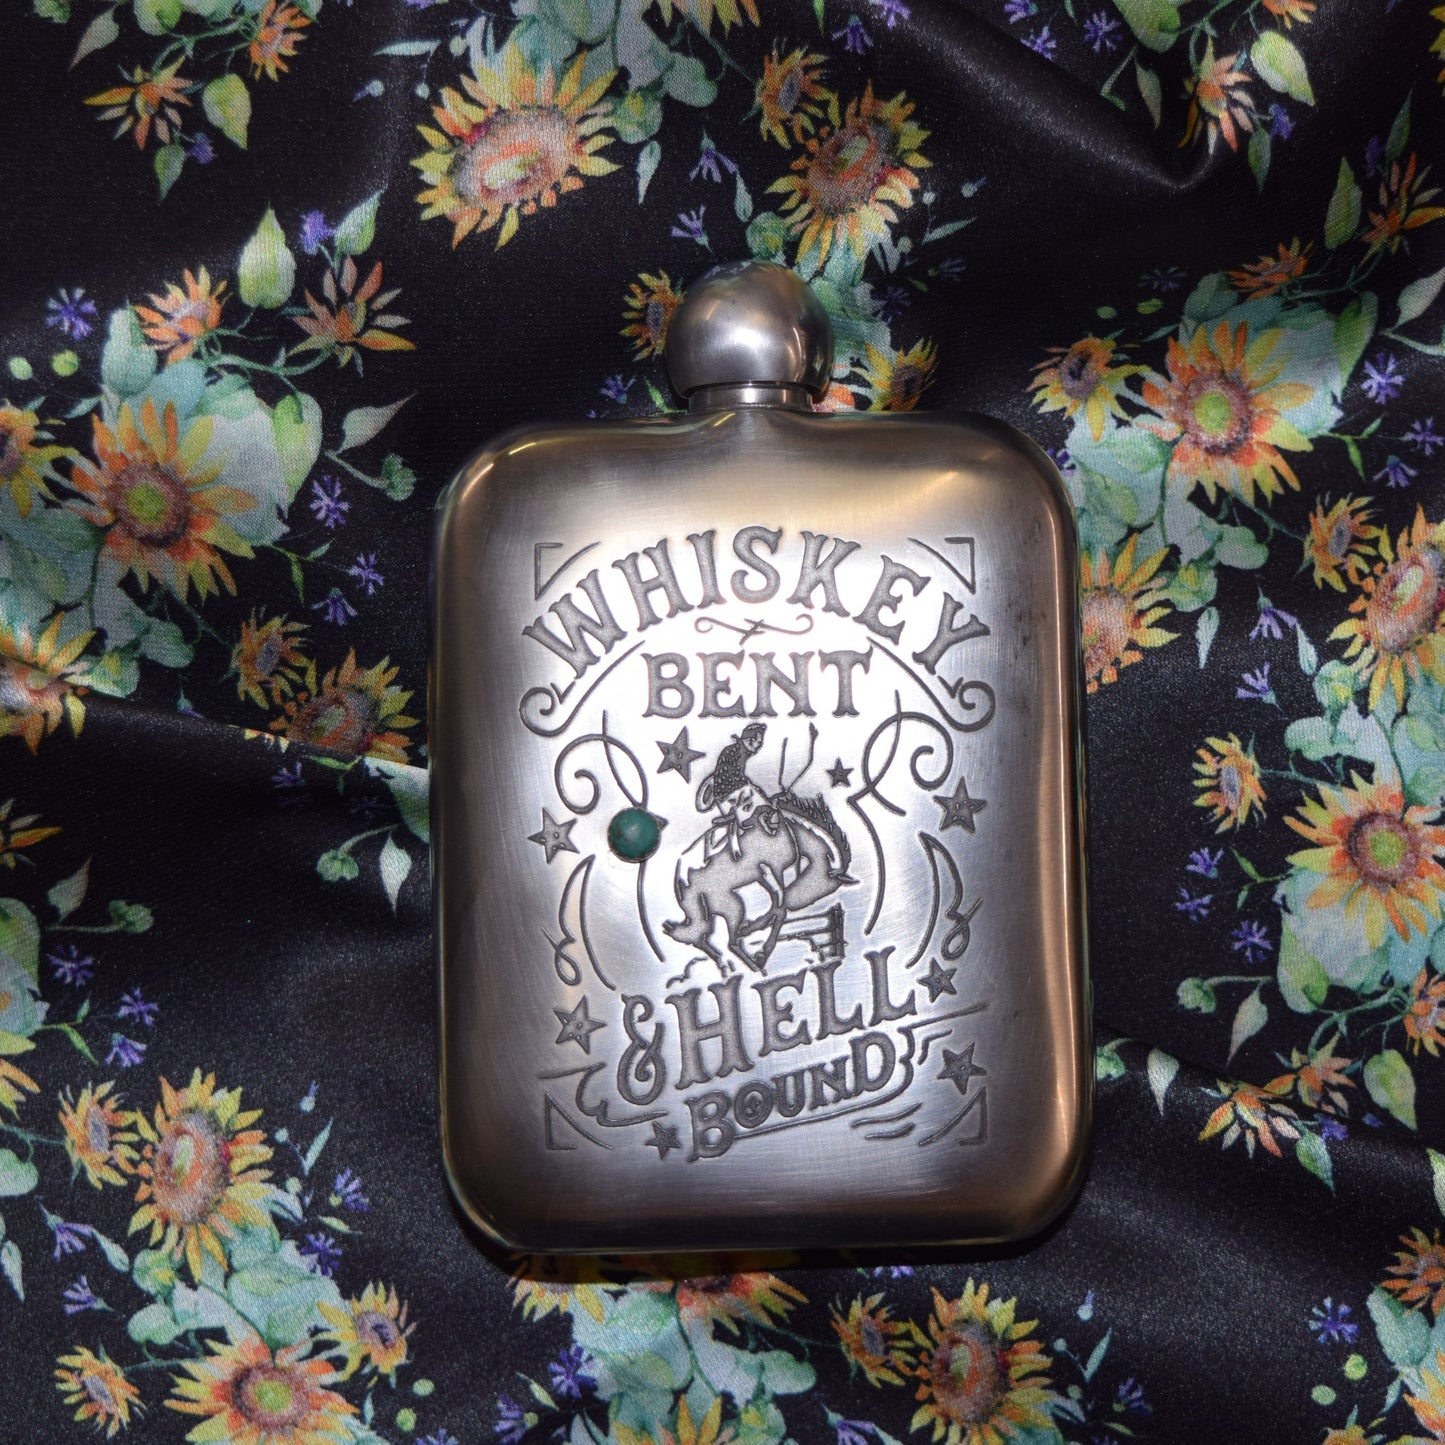 The Whiskey Bent Flask